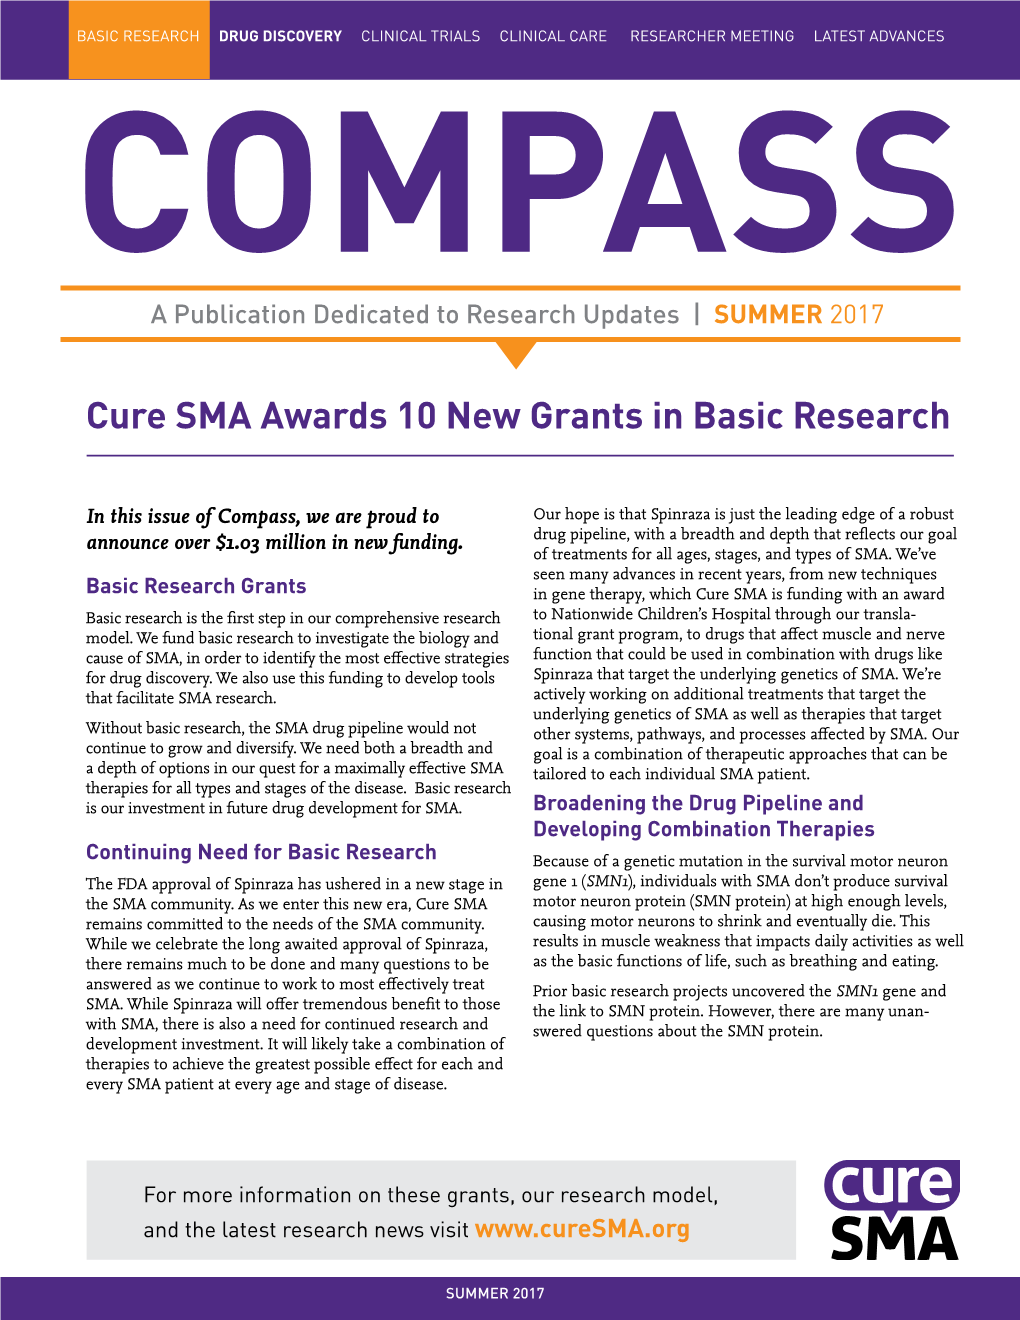 Cure SMA Awards 10 New Grants in Basic Research